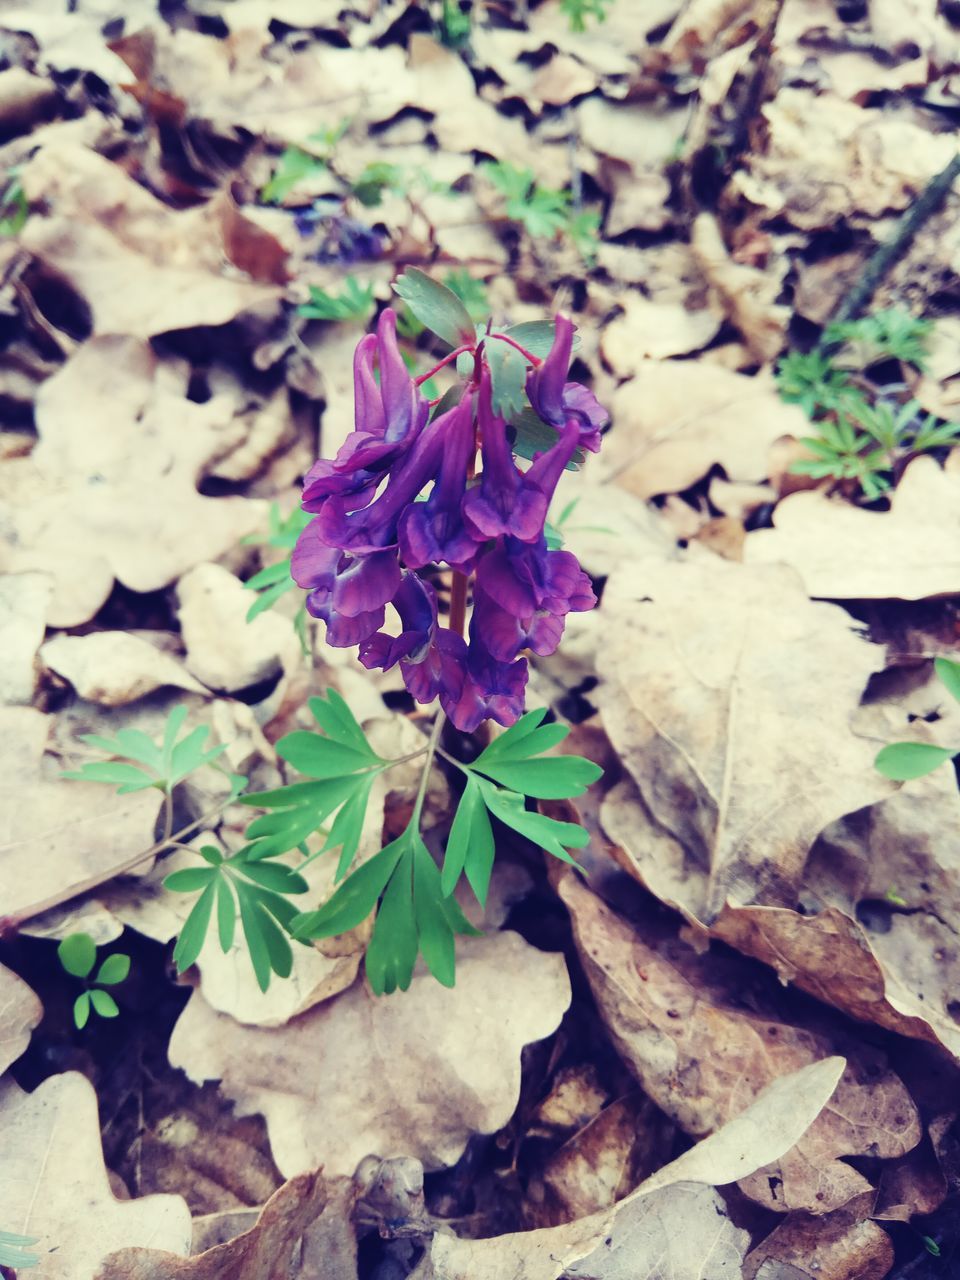 leaf, plant, nature, growth, flower, freshness, purple, beauty in nature, leaves, no people, close-up, outdoors, fragility, day, flower head